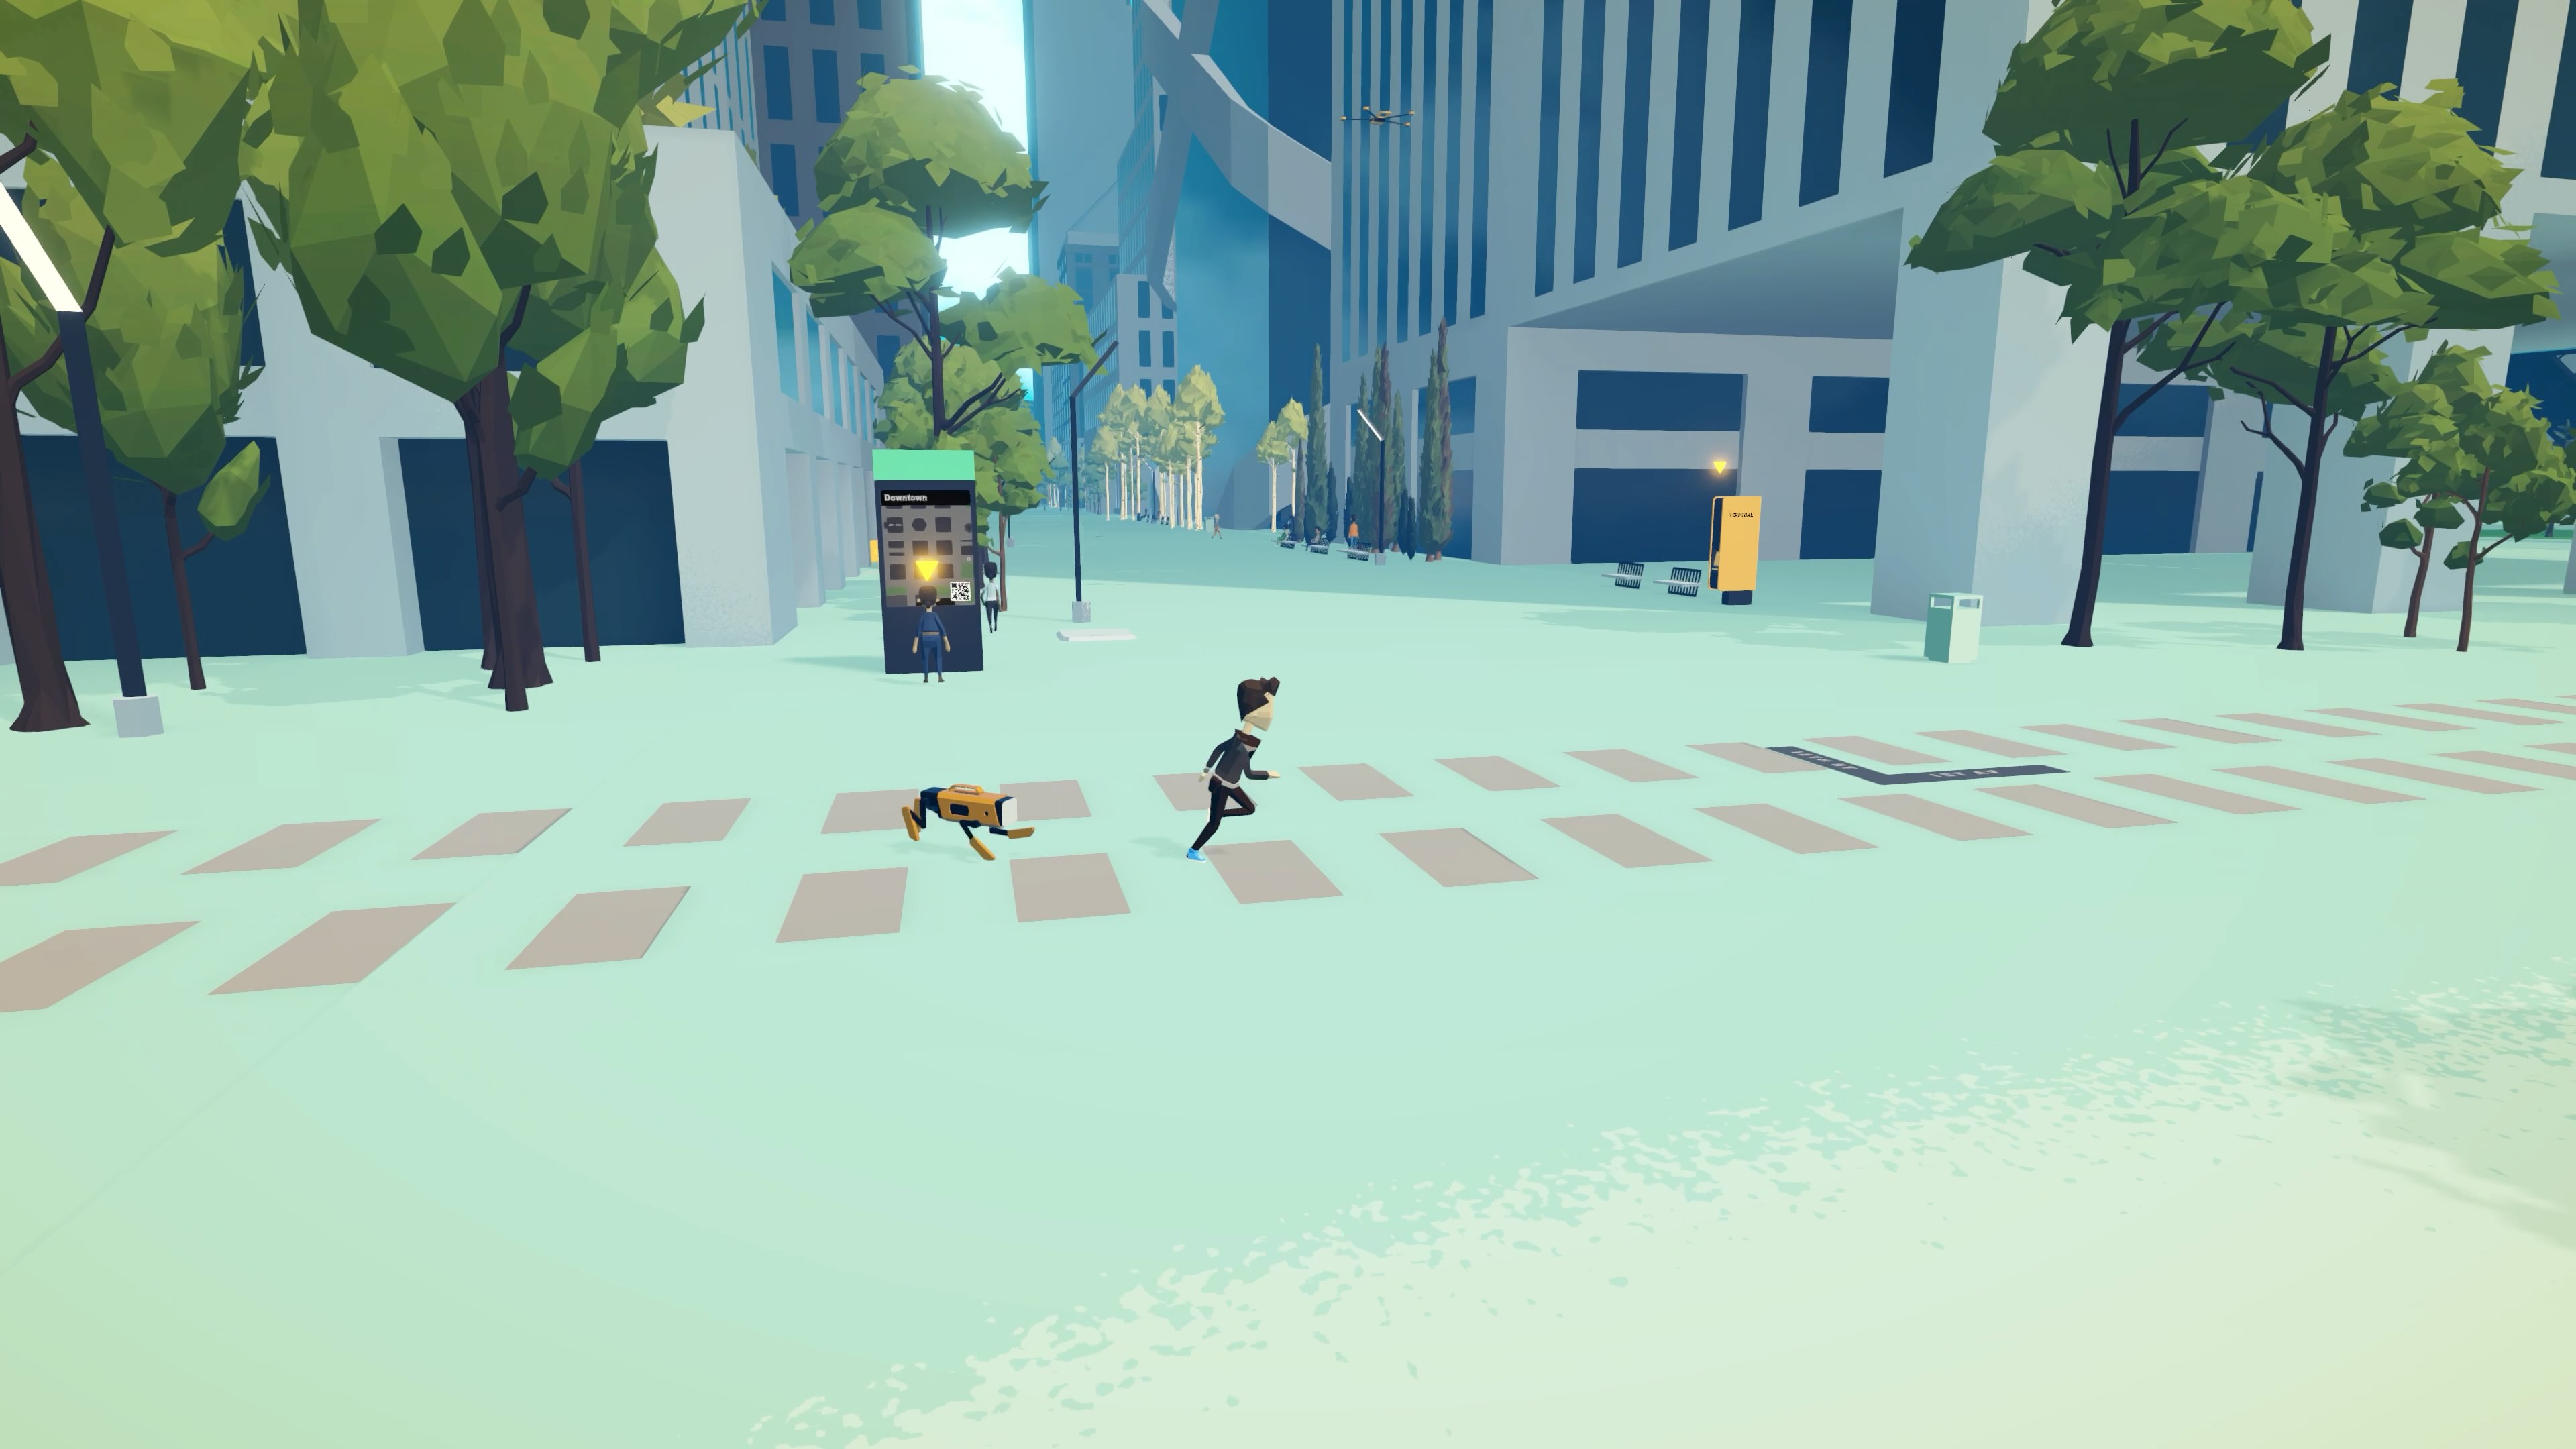 Protagonist running with robot dog